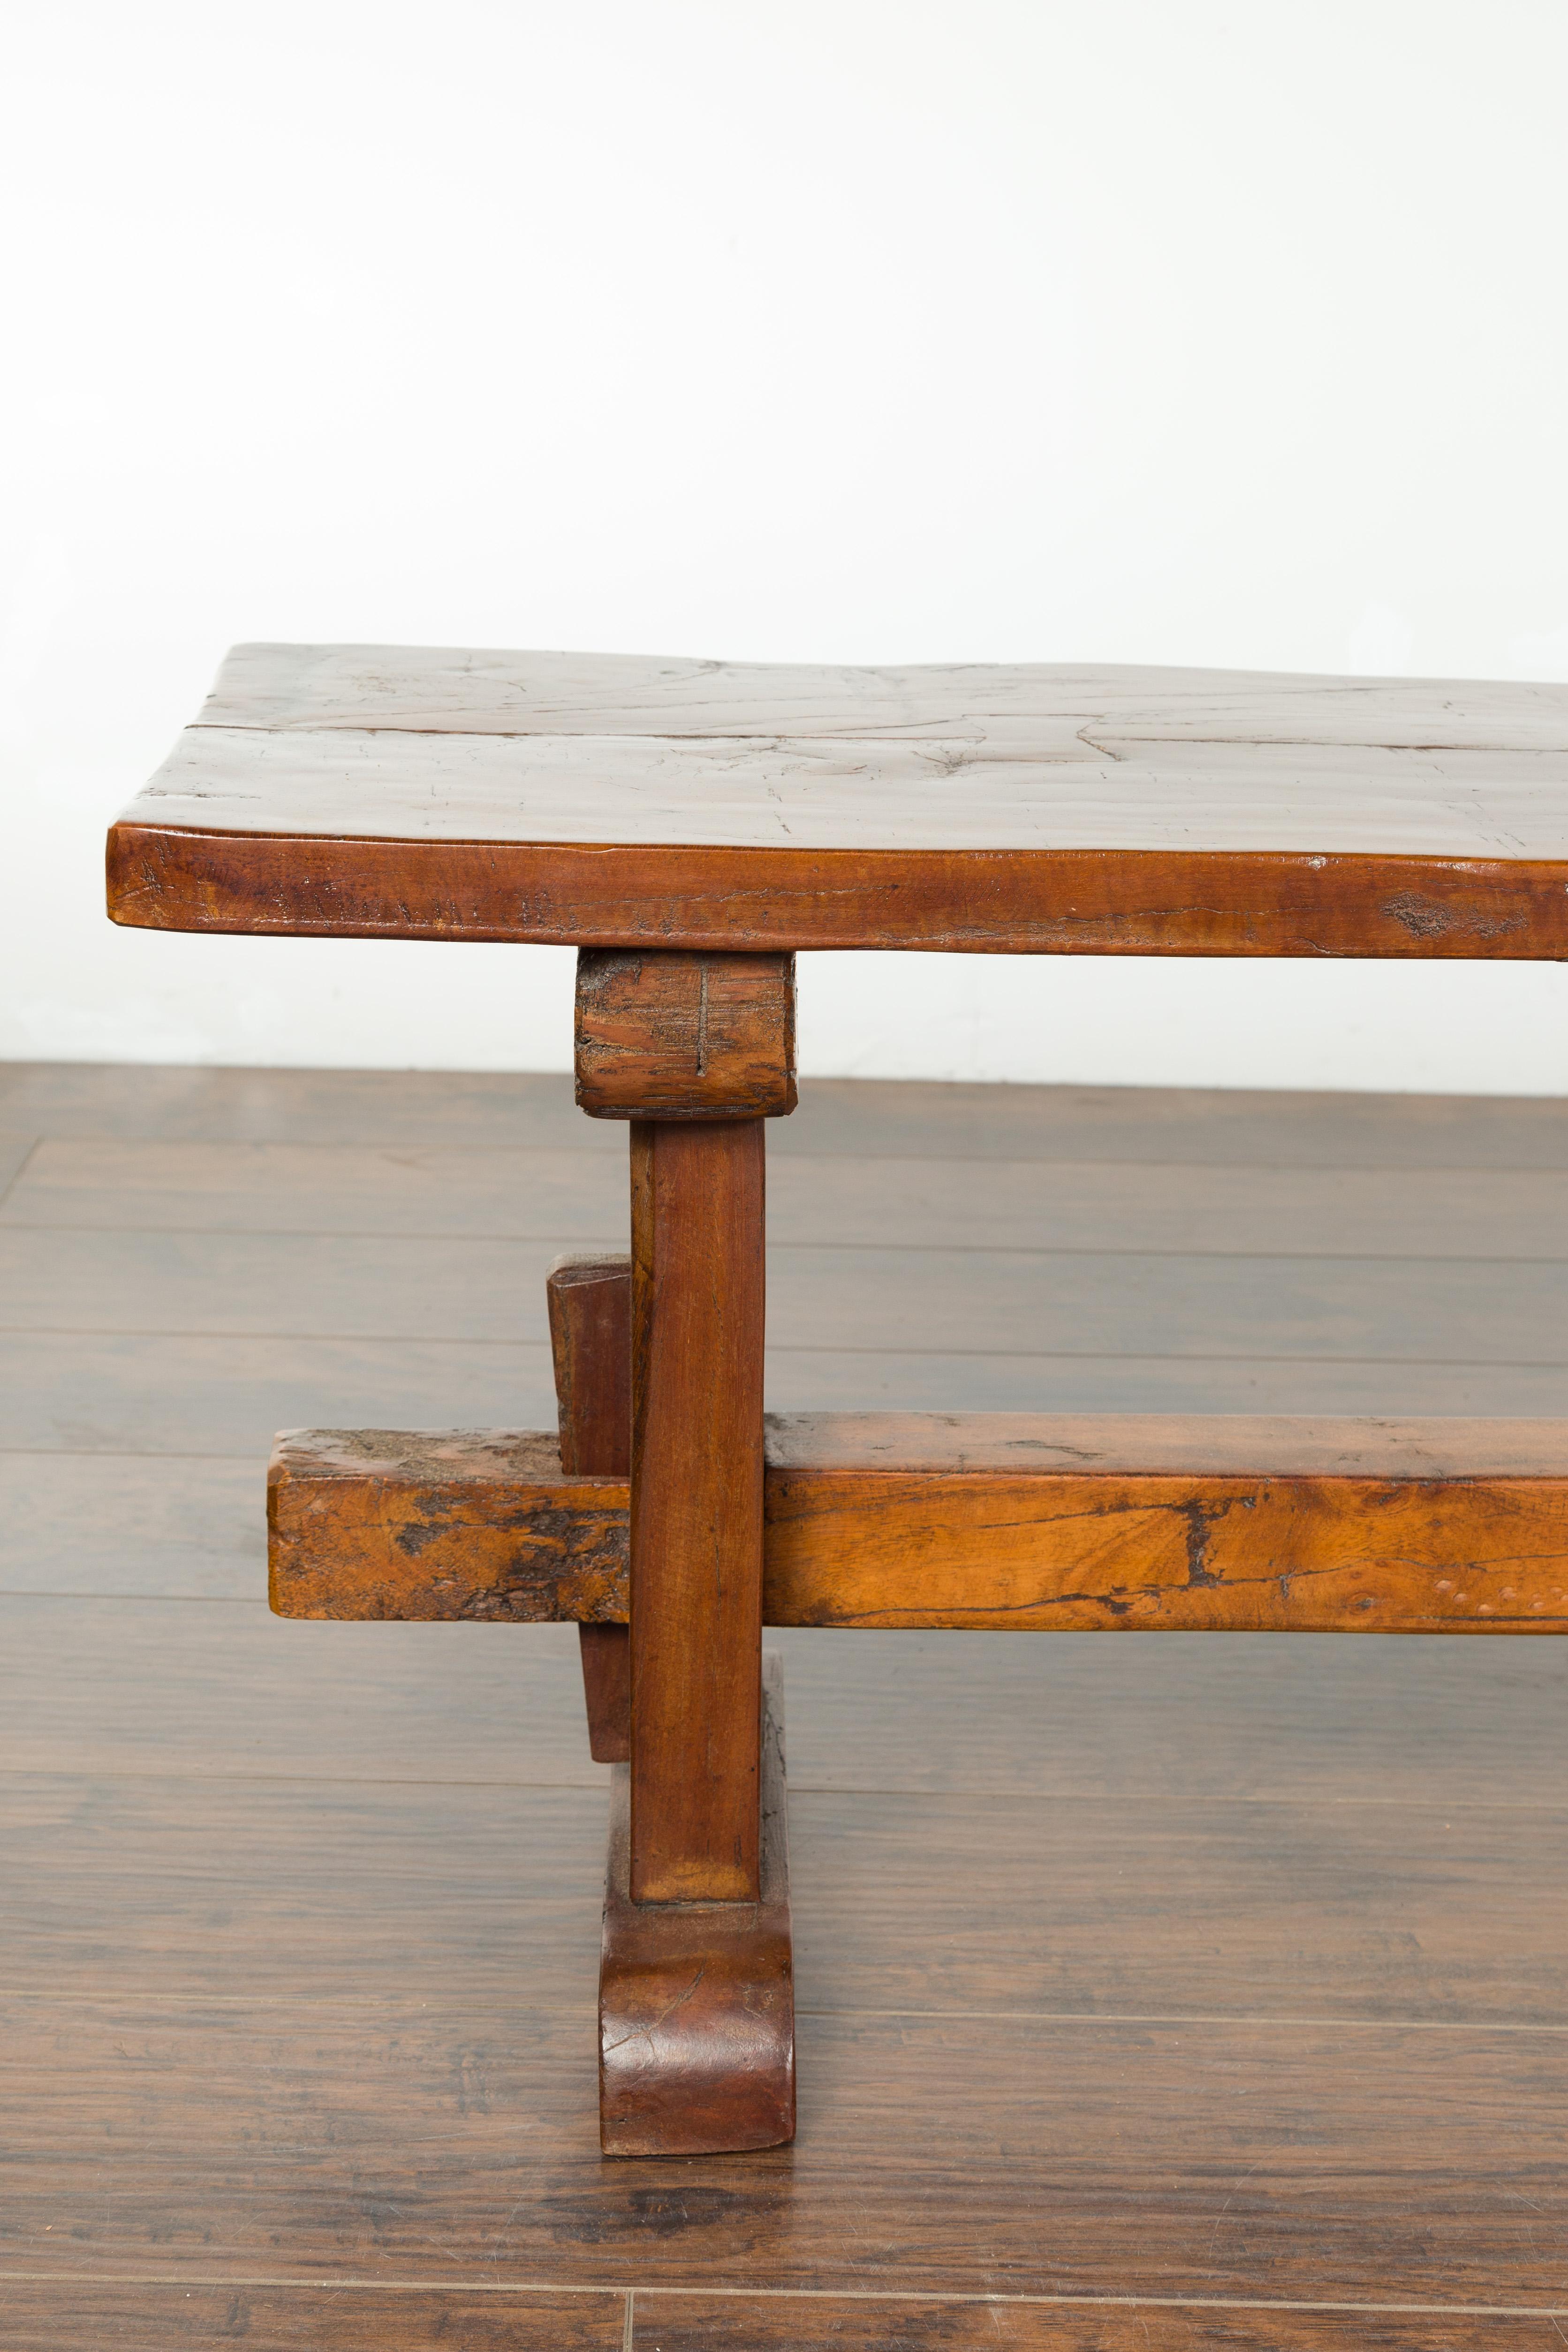 Rustic Italian Walnut Bench with Trestle Base from the Early 19th Century 2